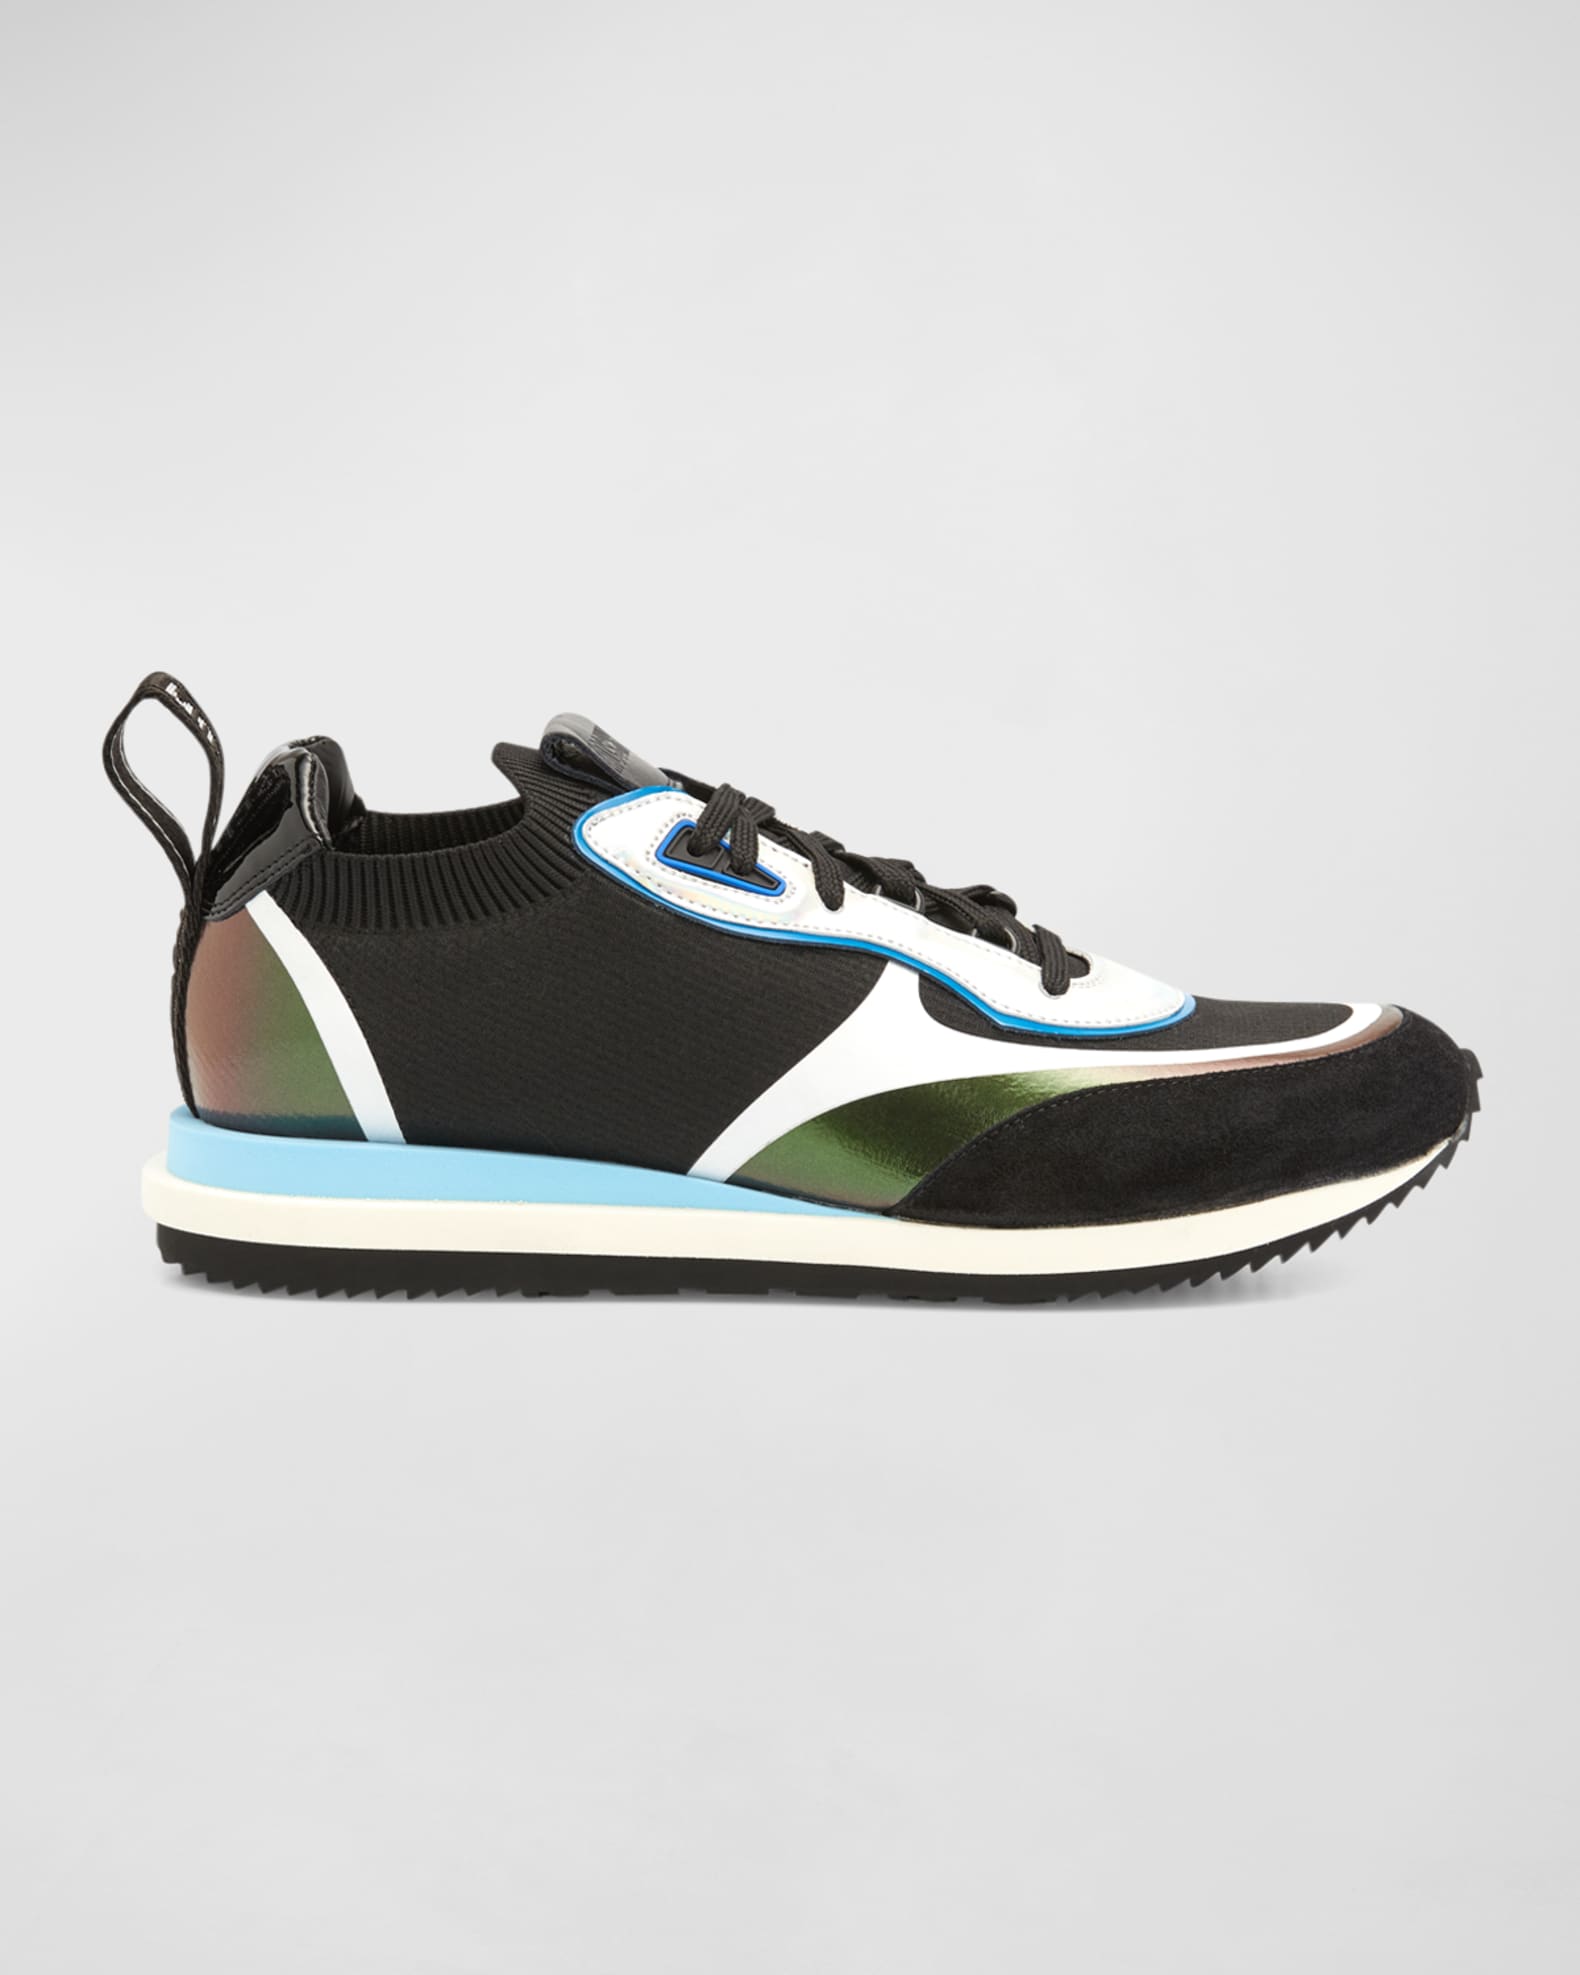 Moschino Men's Stretch-Knit Runner Sneakers | Neiman Marcus